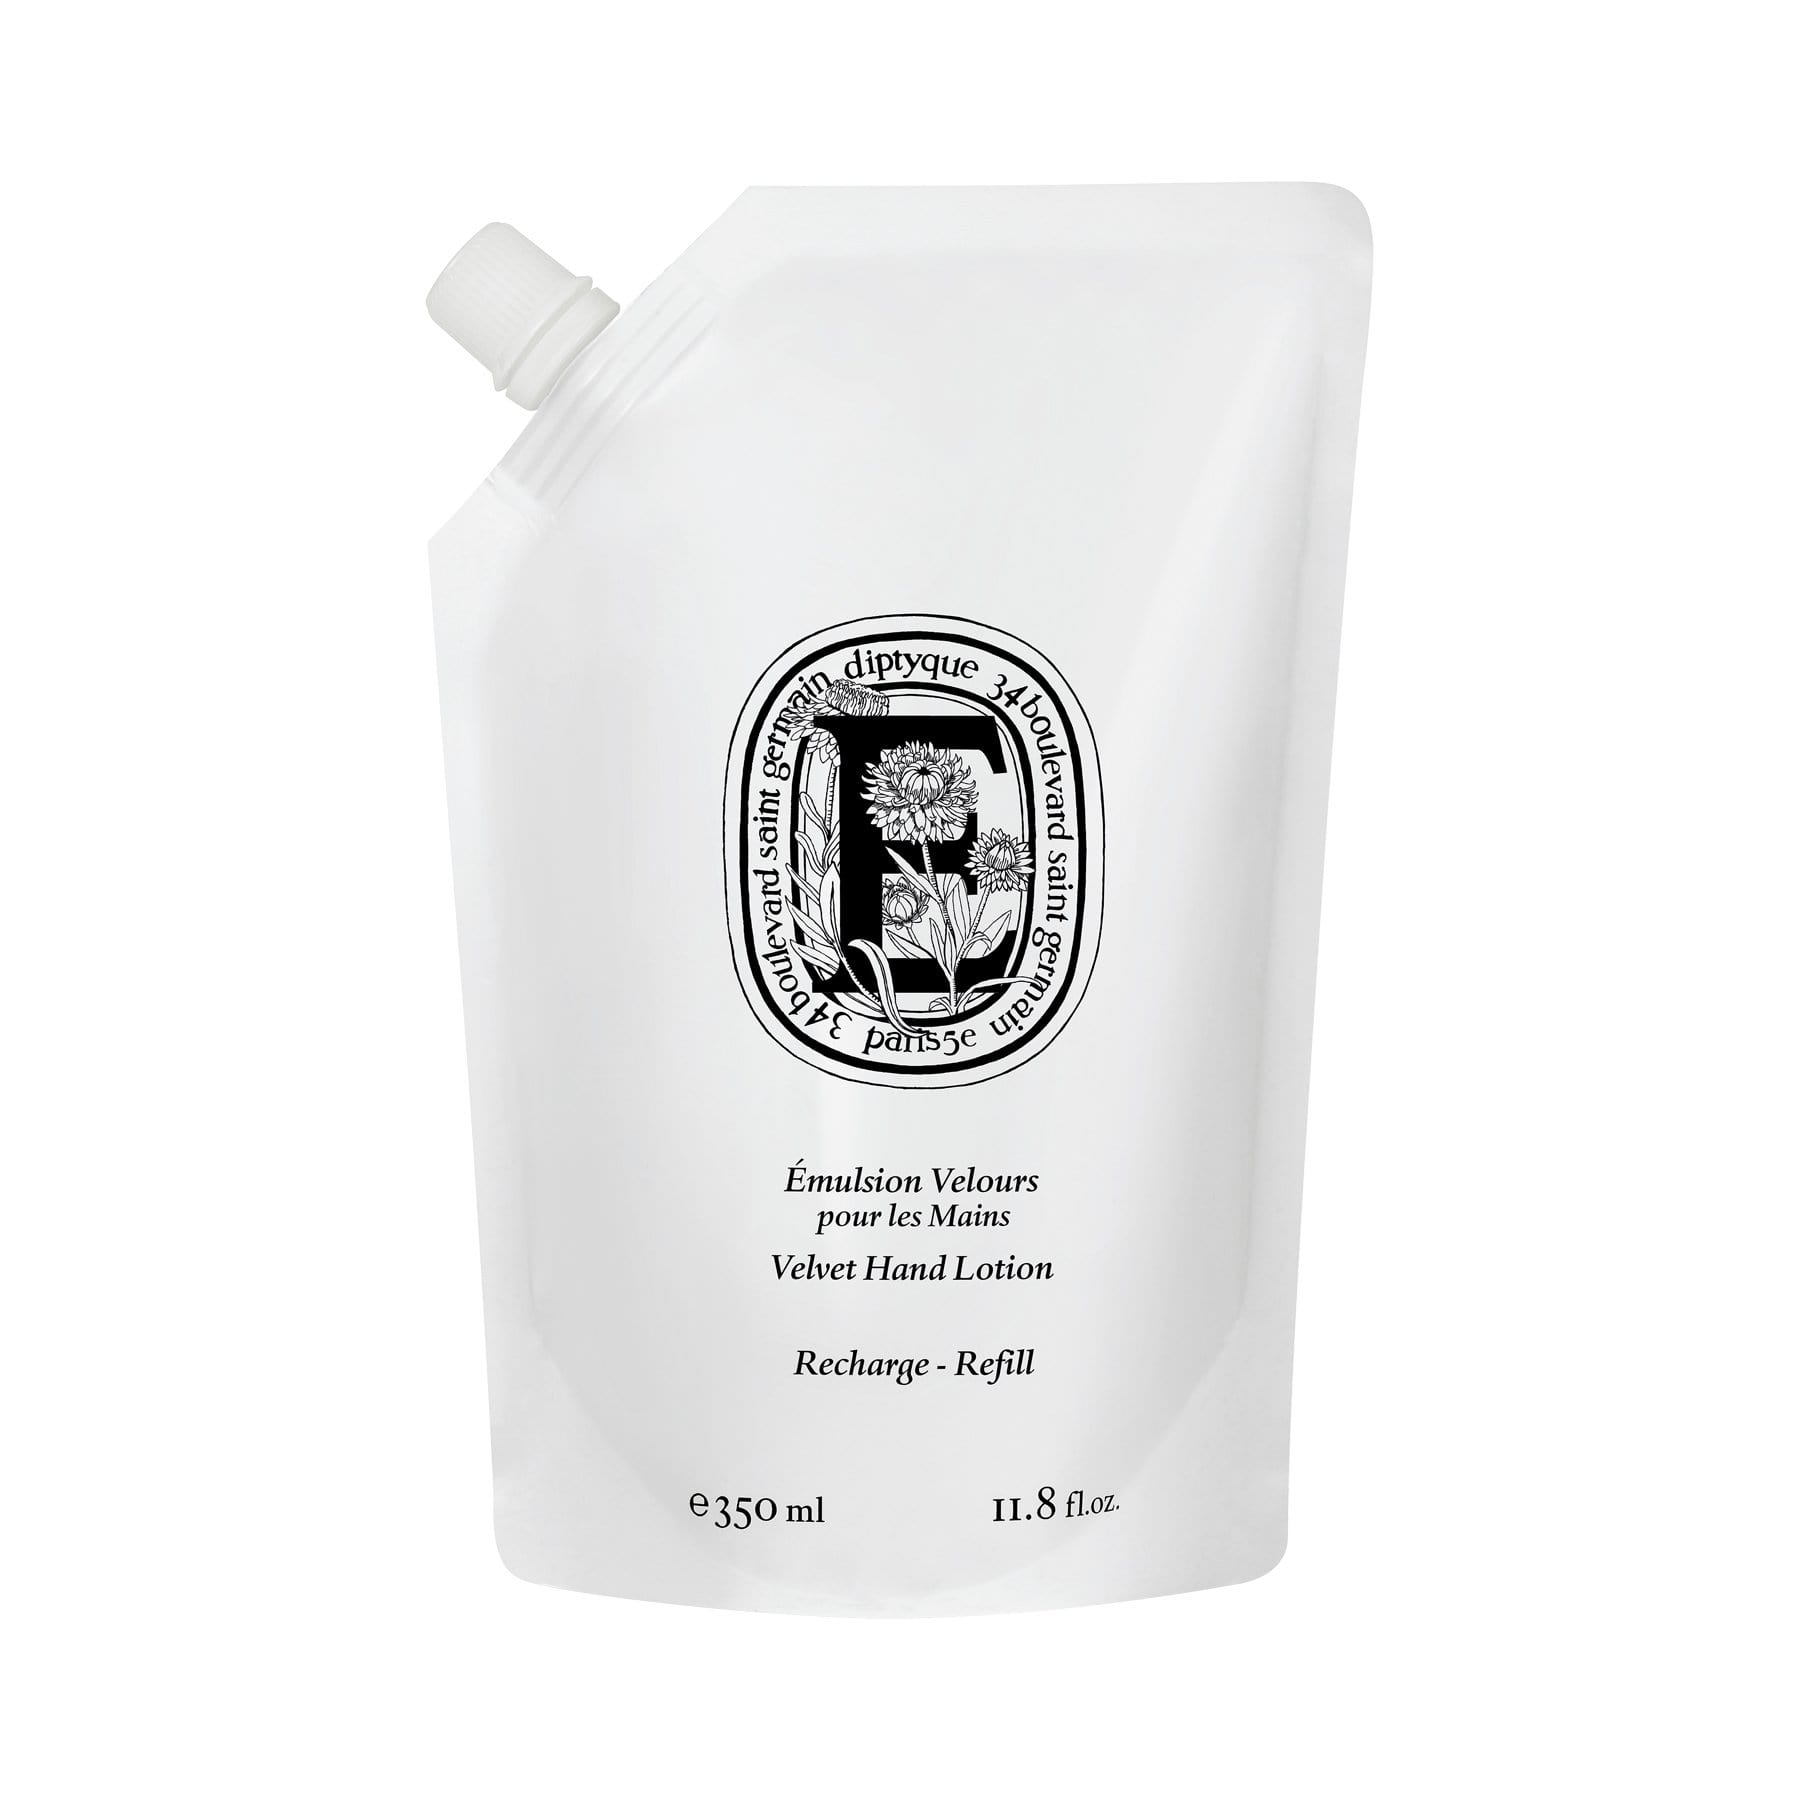 Diptyque velvety hand lotion